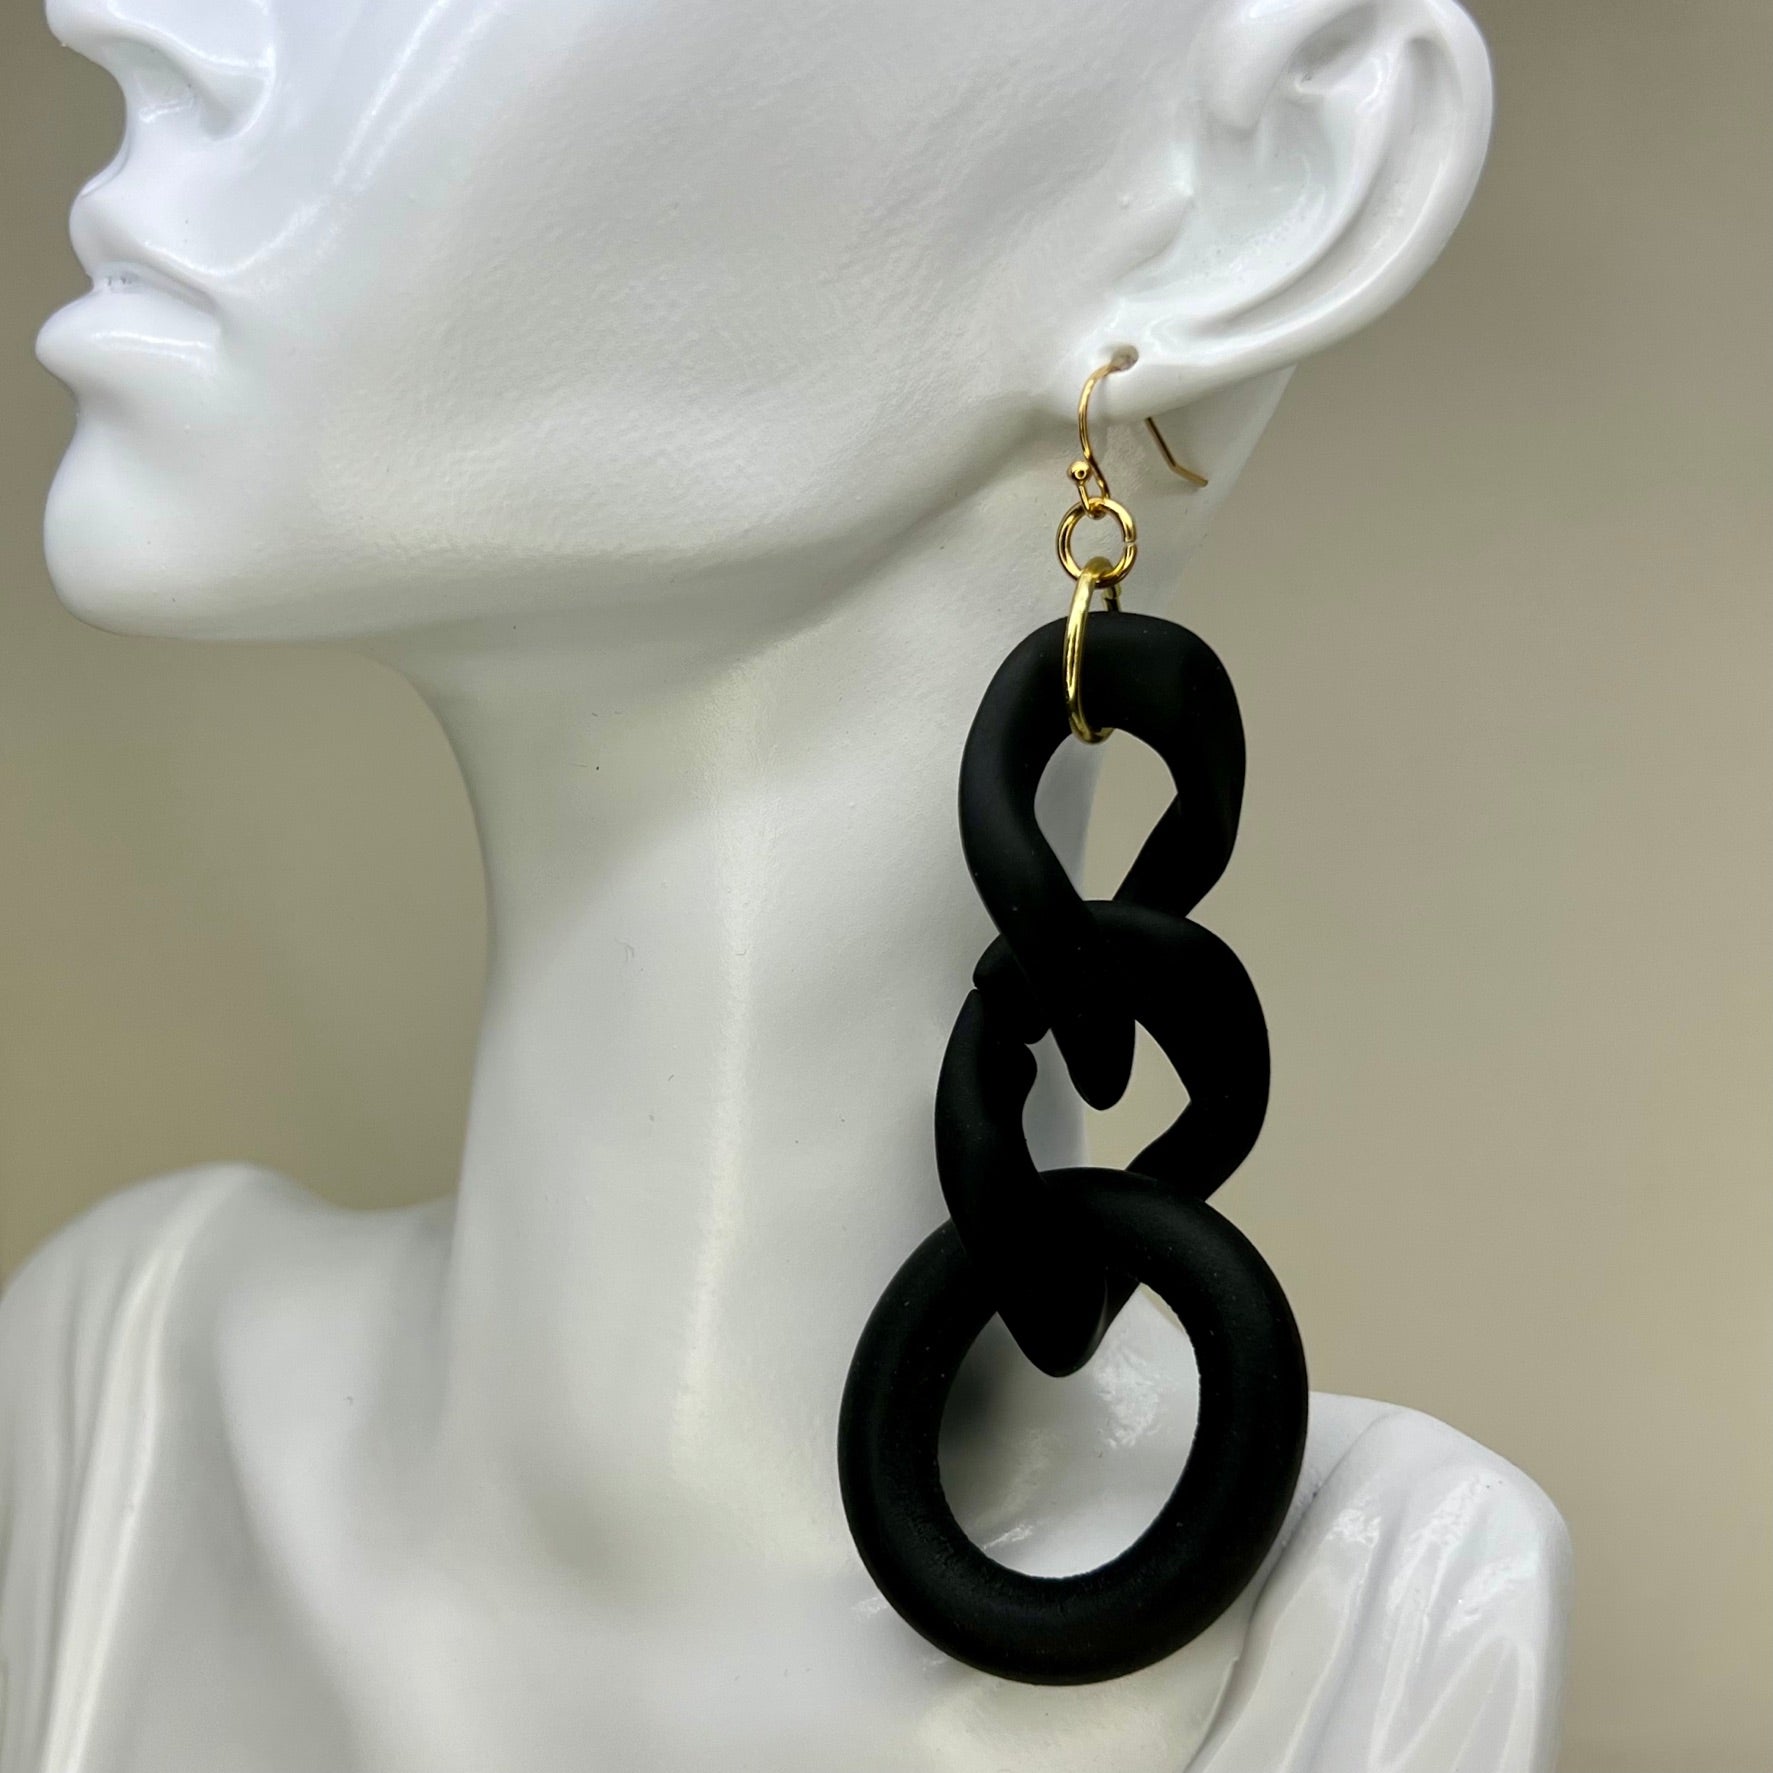 Plastic Chain Link Earrings with Rubber Ring (Assorted Colors)